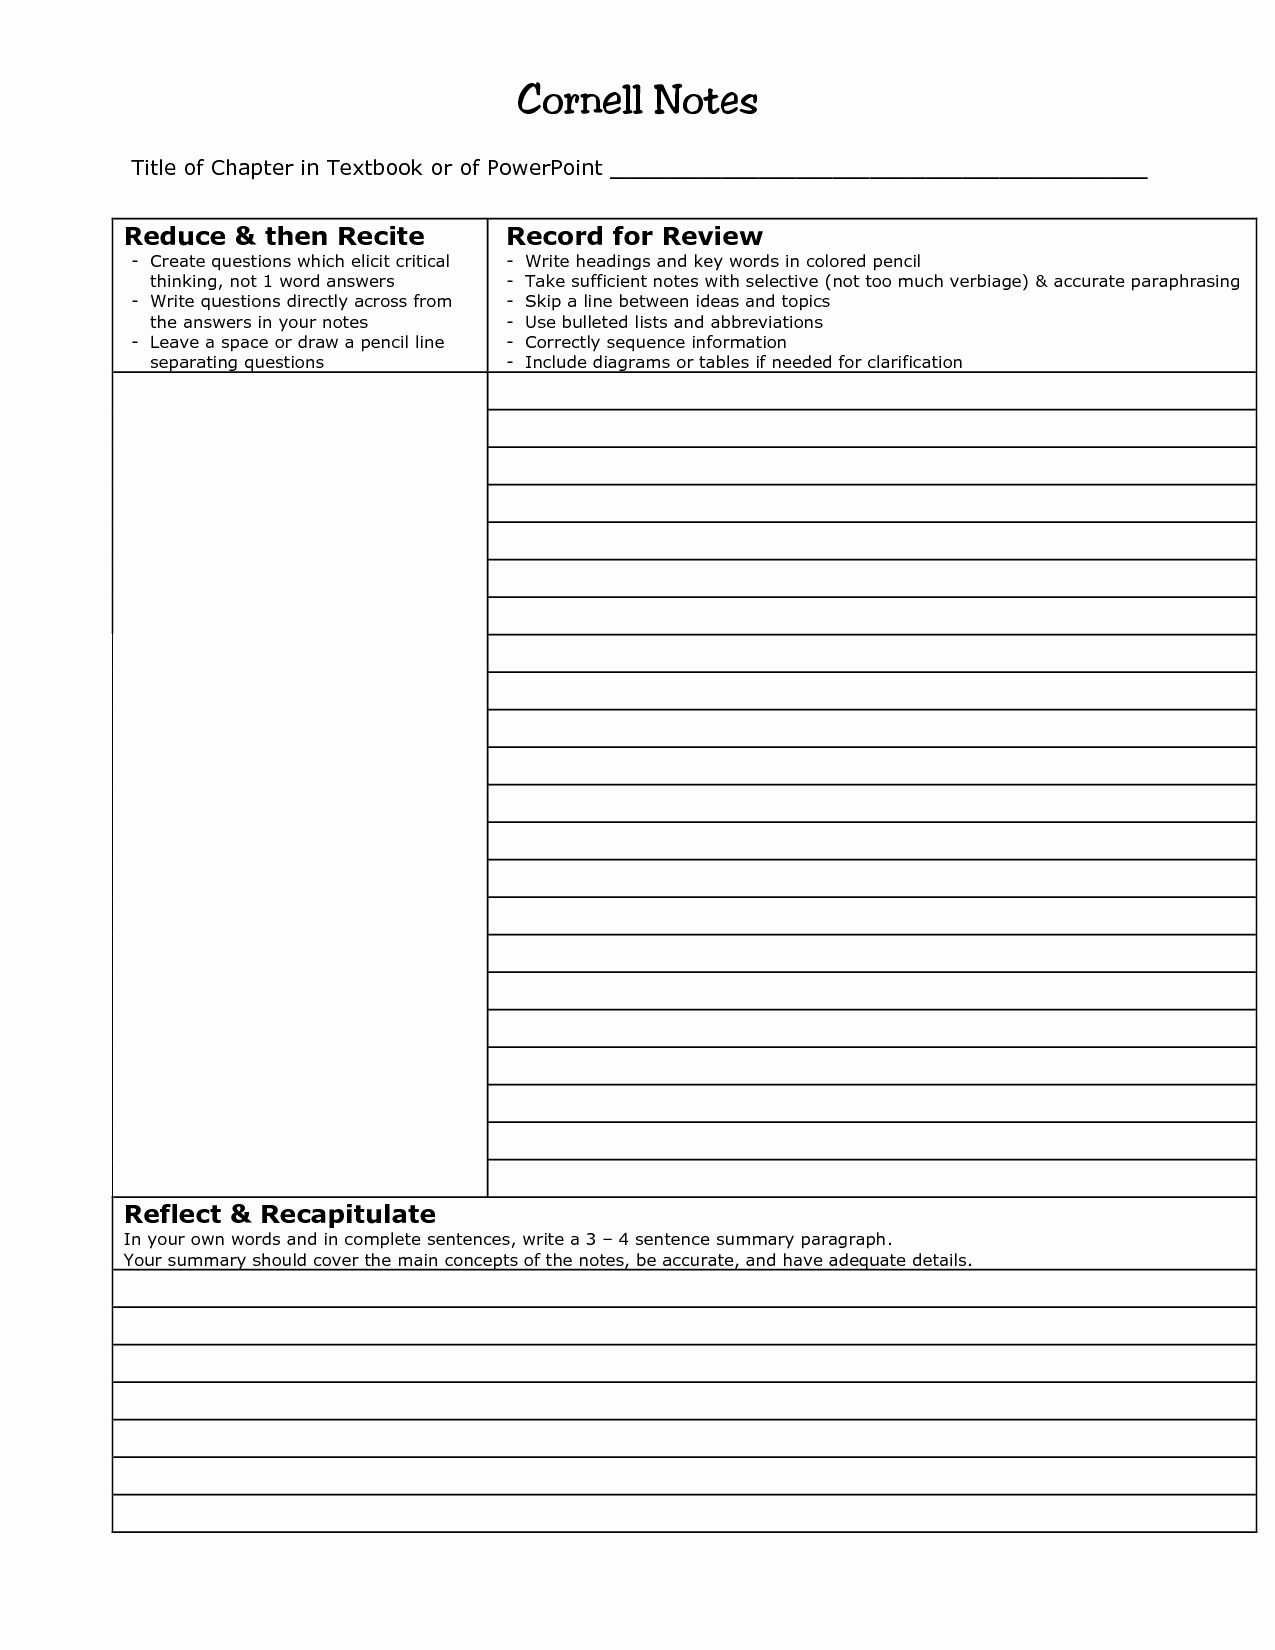 Note Taking Template Word Luxury Cornell Notes Template Word Beepmunk